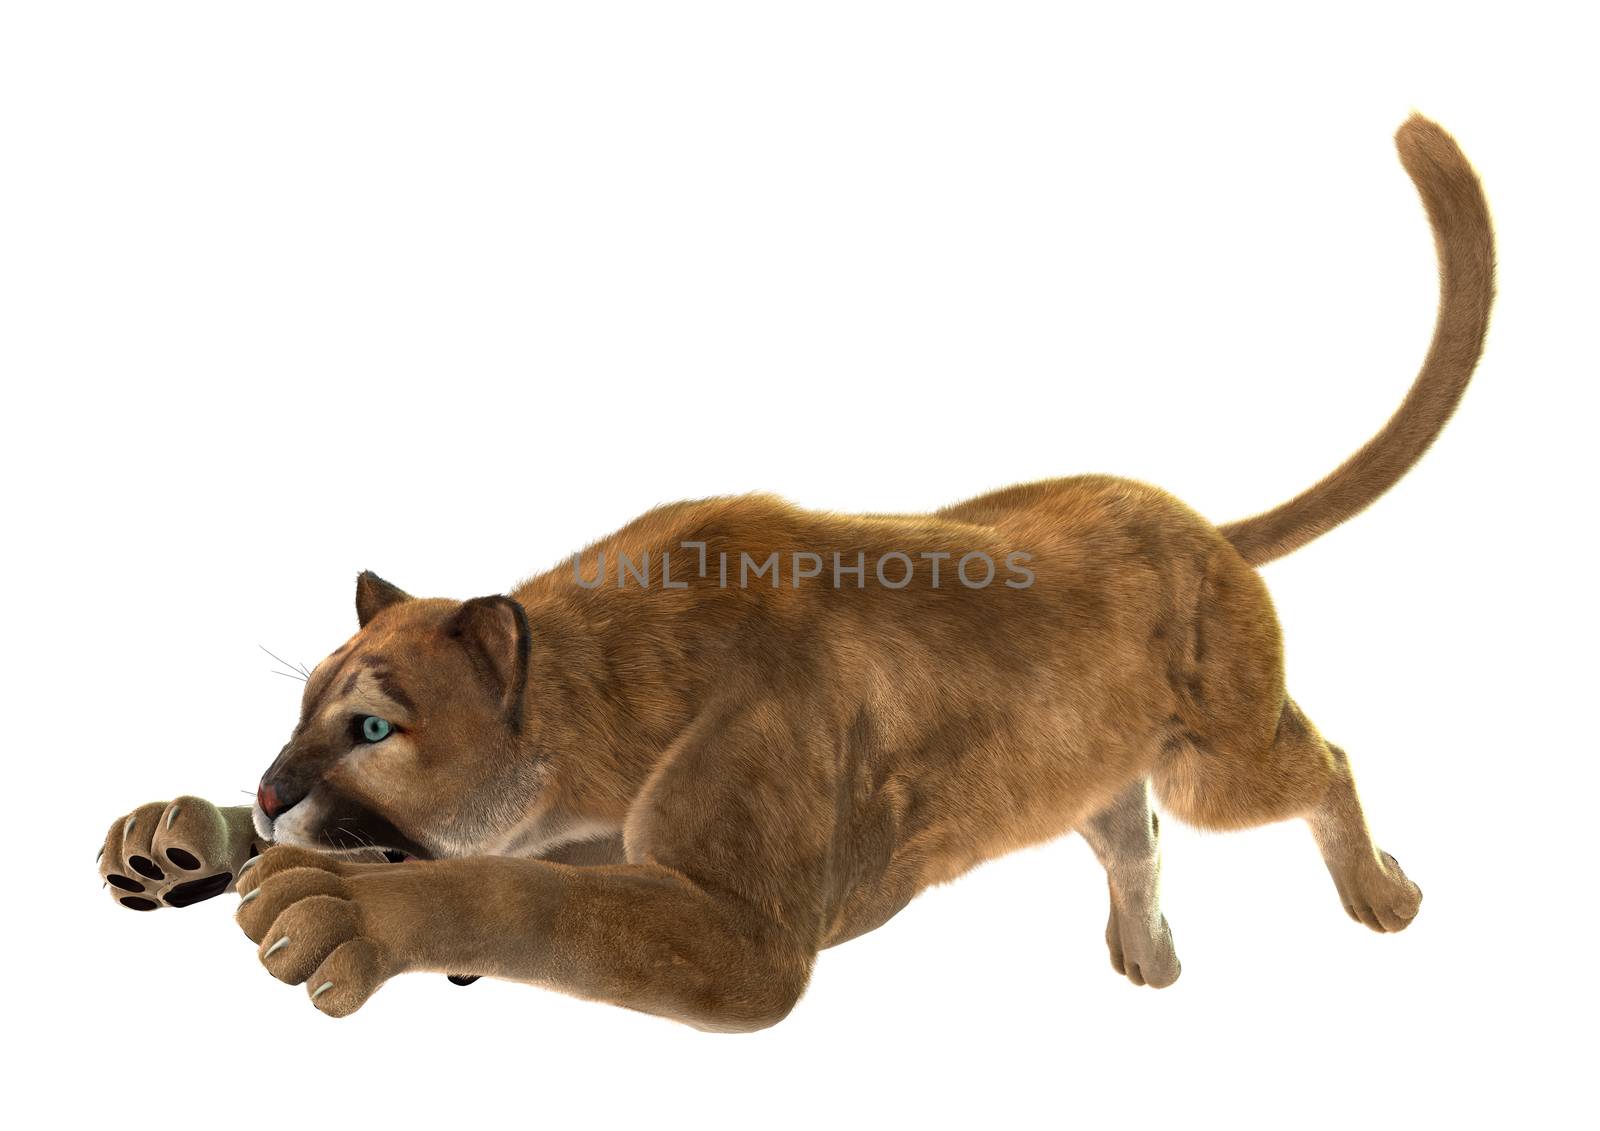 3D digital render of a puma, also known as a cougar, mountain lion, or catamount, isolated on white background